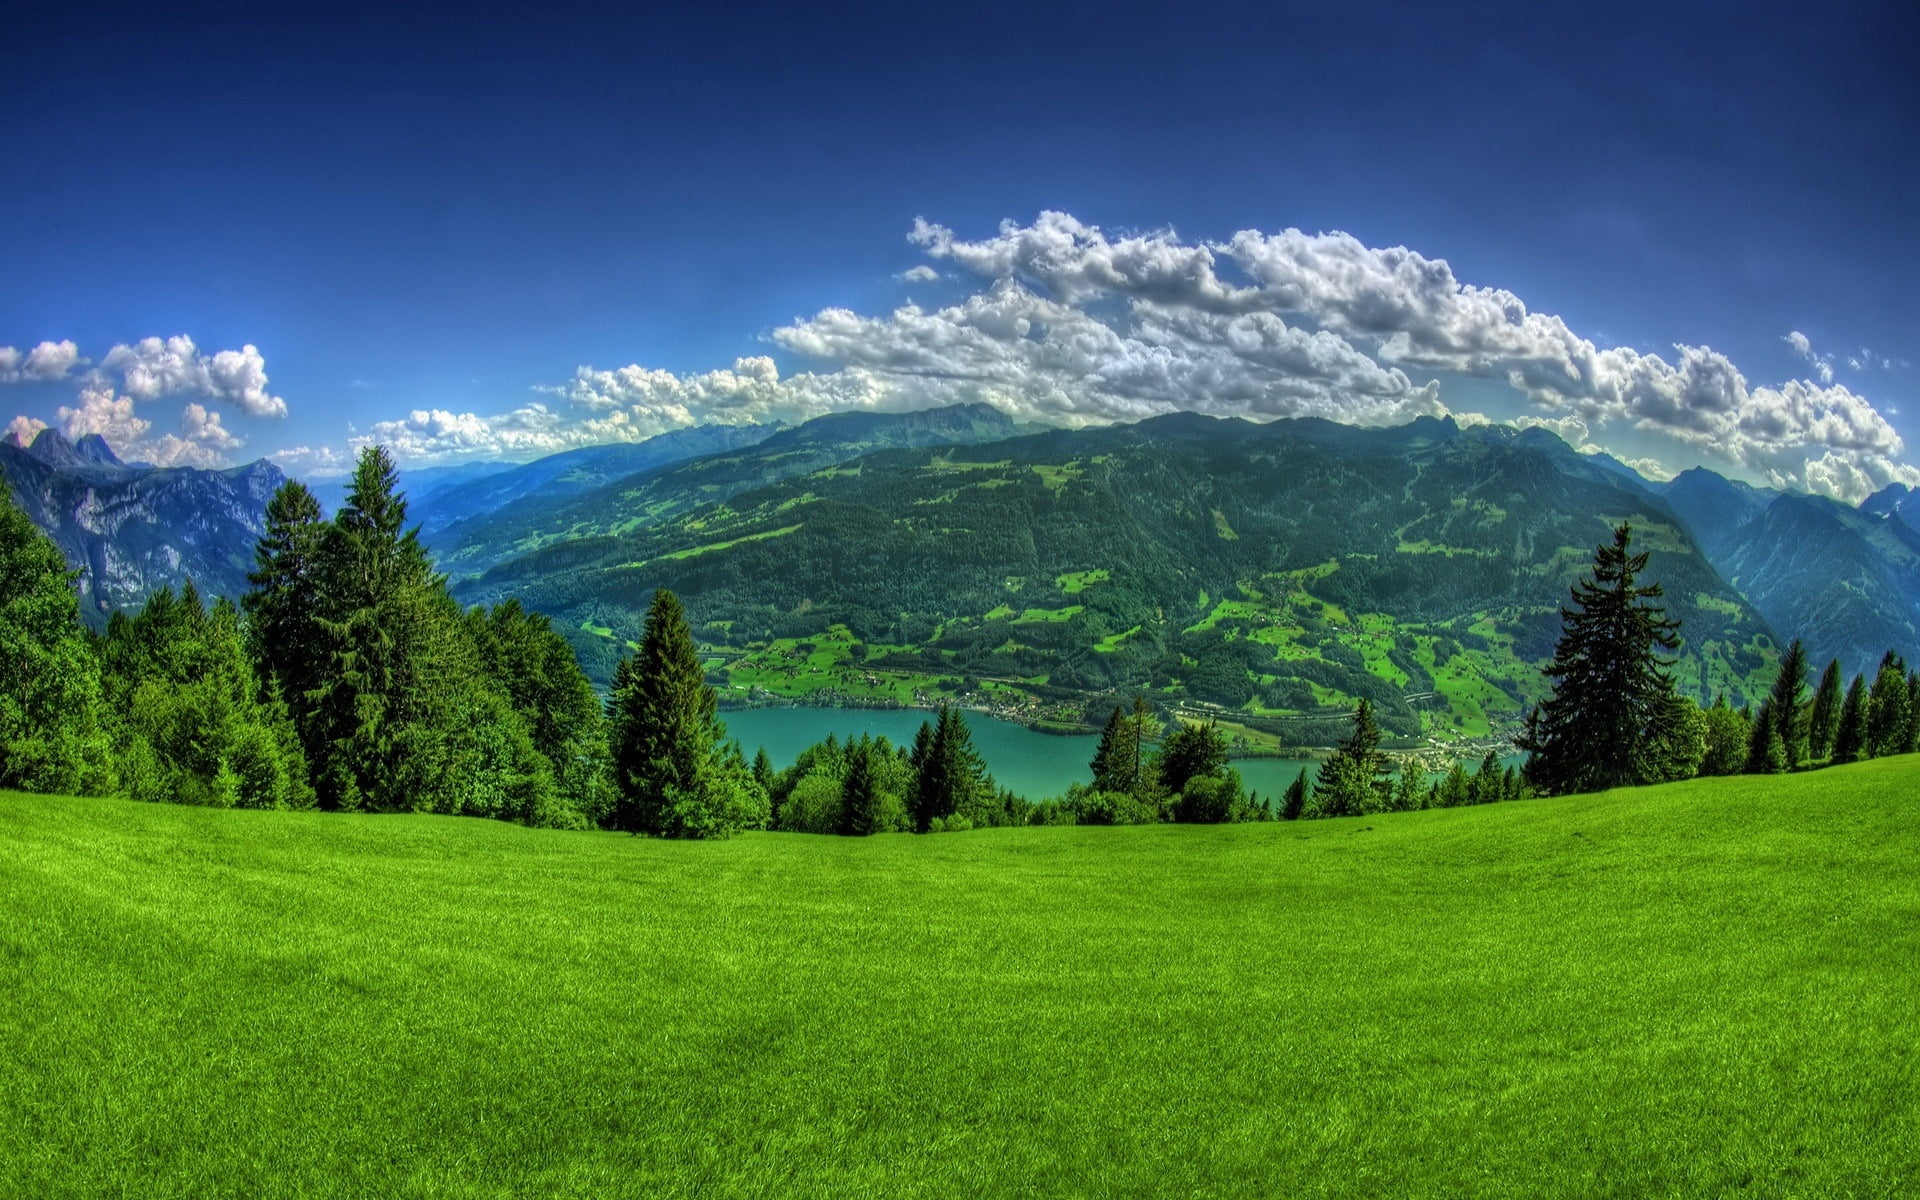 green leafed tree, greens, grass, mountains, slope, lake, trees